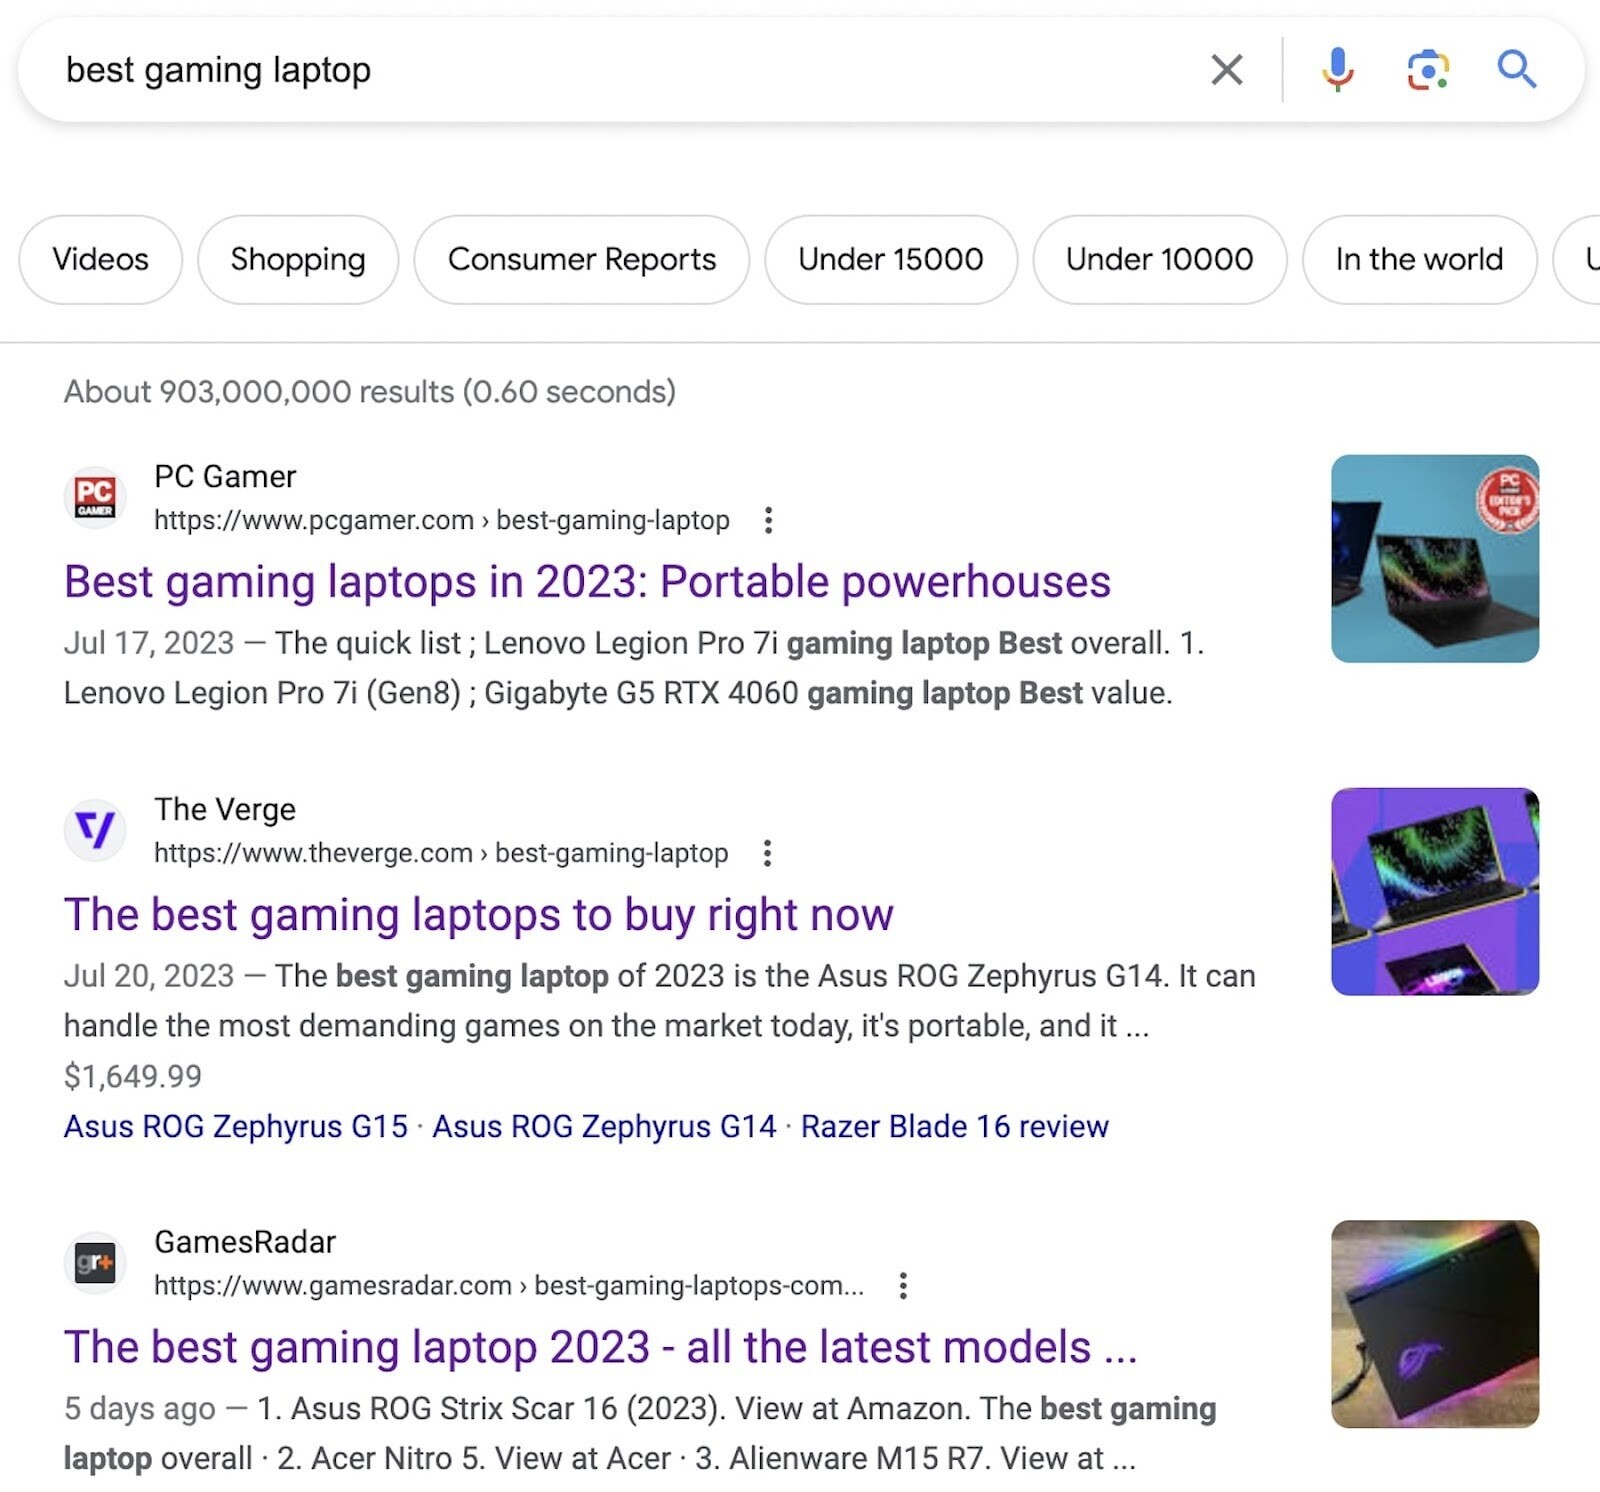 Google SERP for "best gaming laptop" search